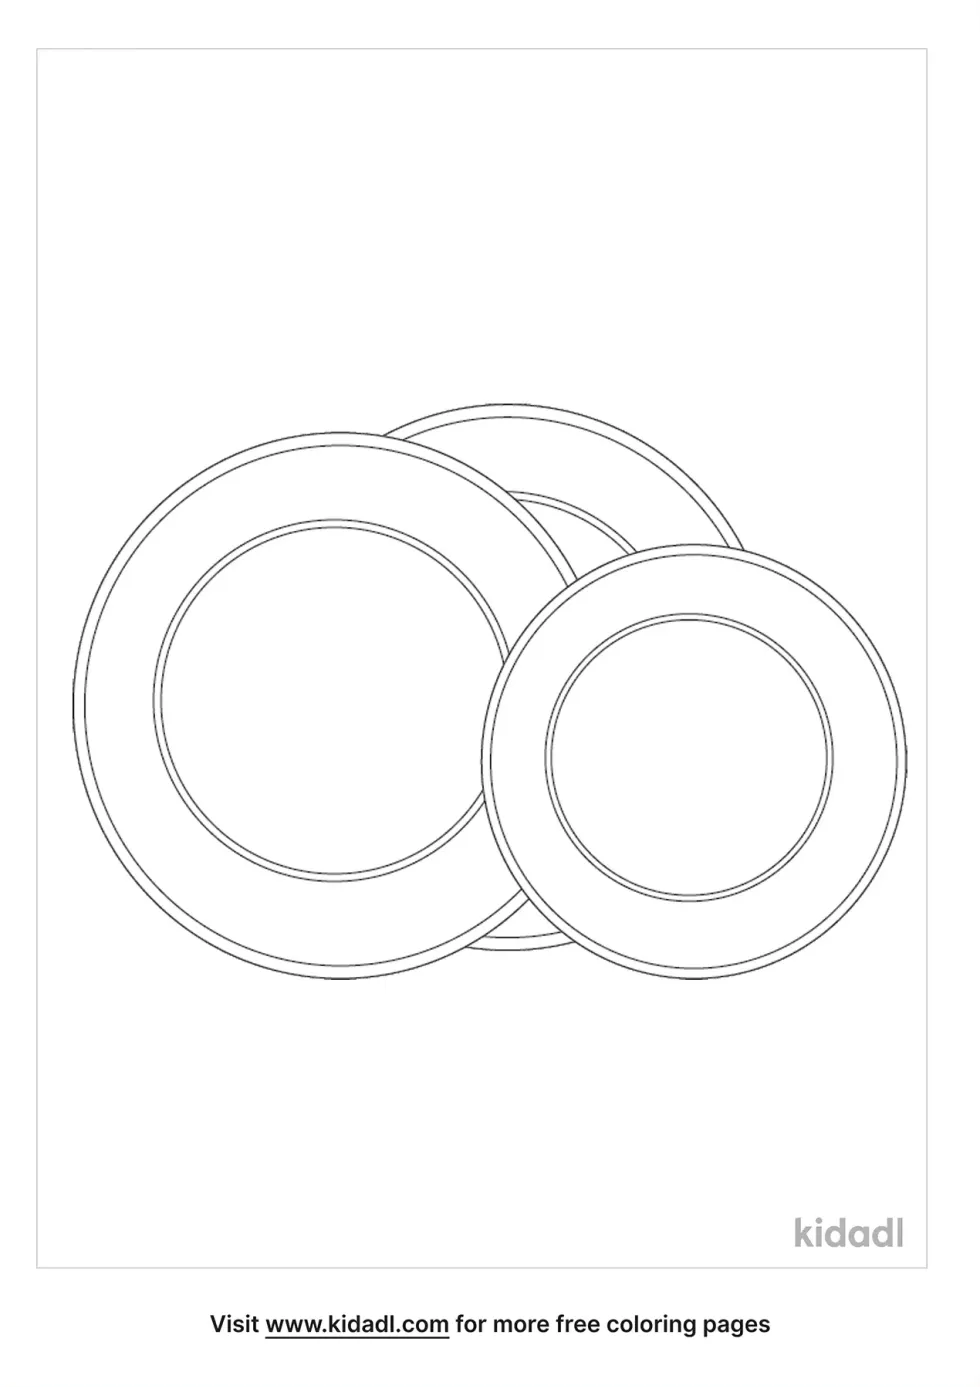 Plates Coloring Page